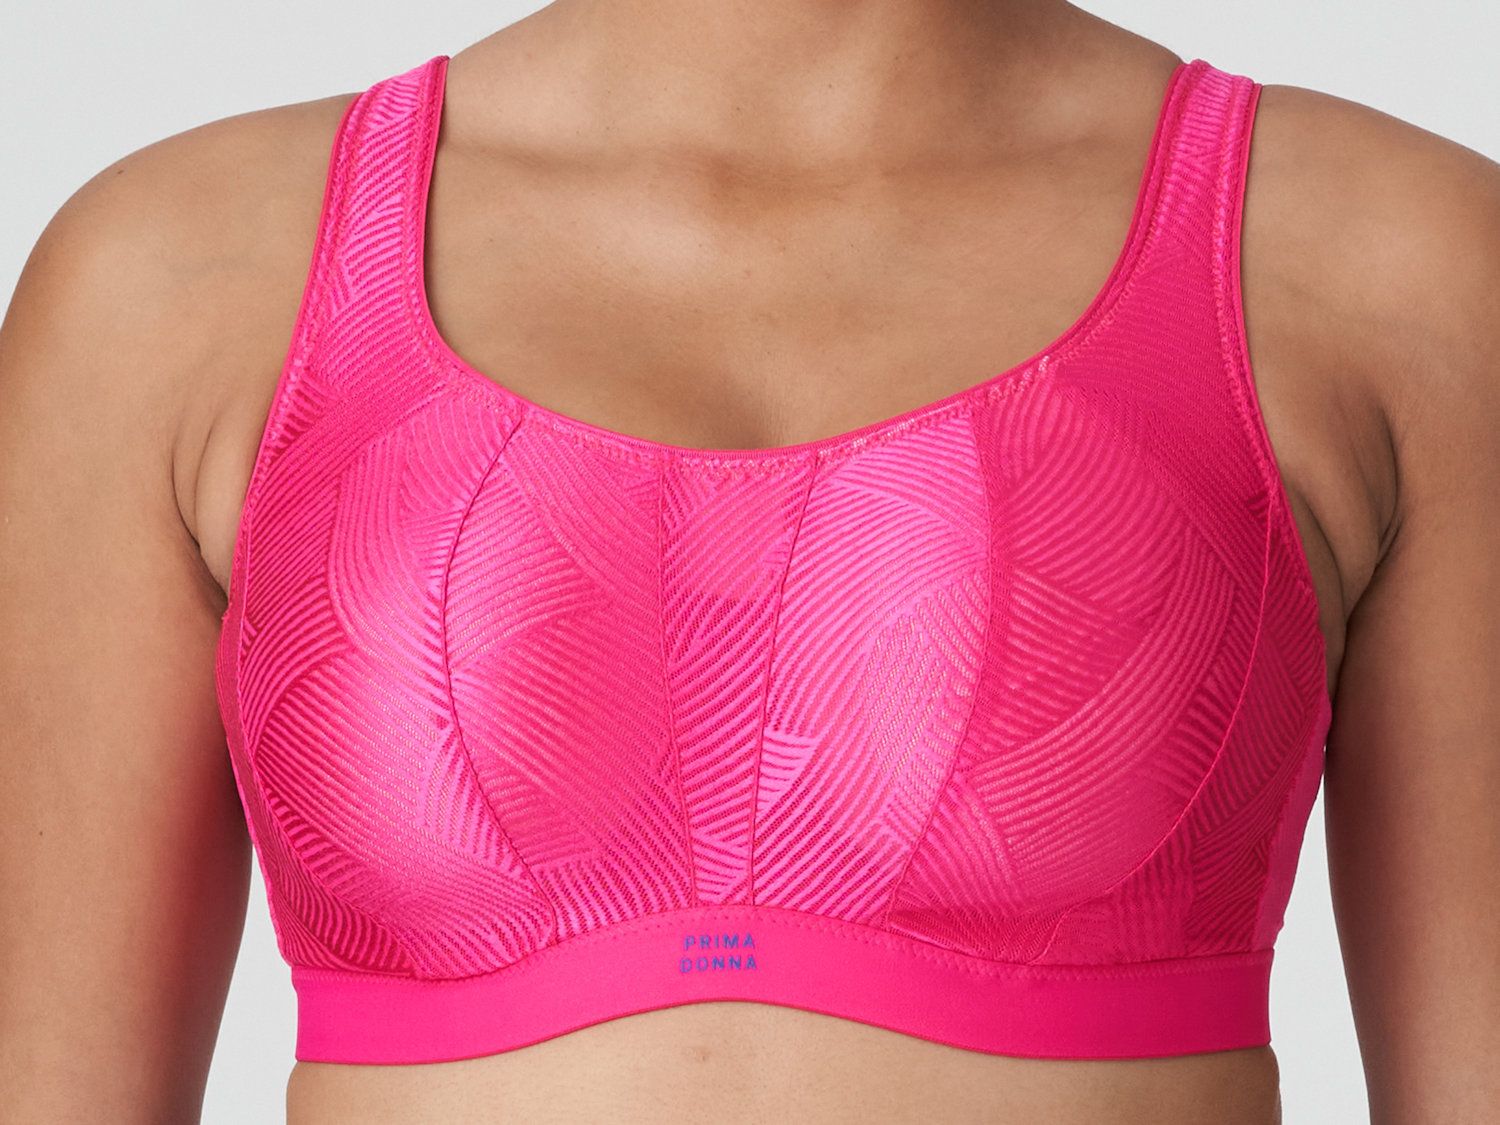 PrimaDonna Sport THE GAME Electric Pink padded sports bra